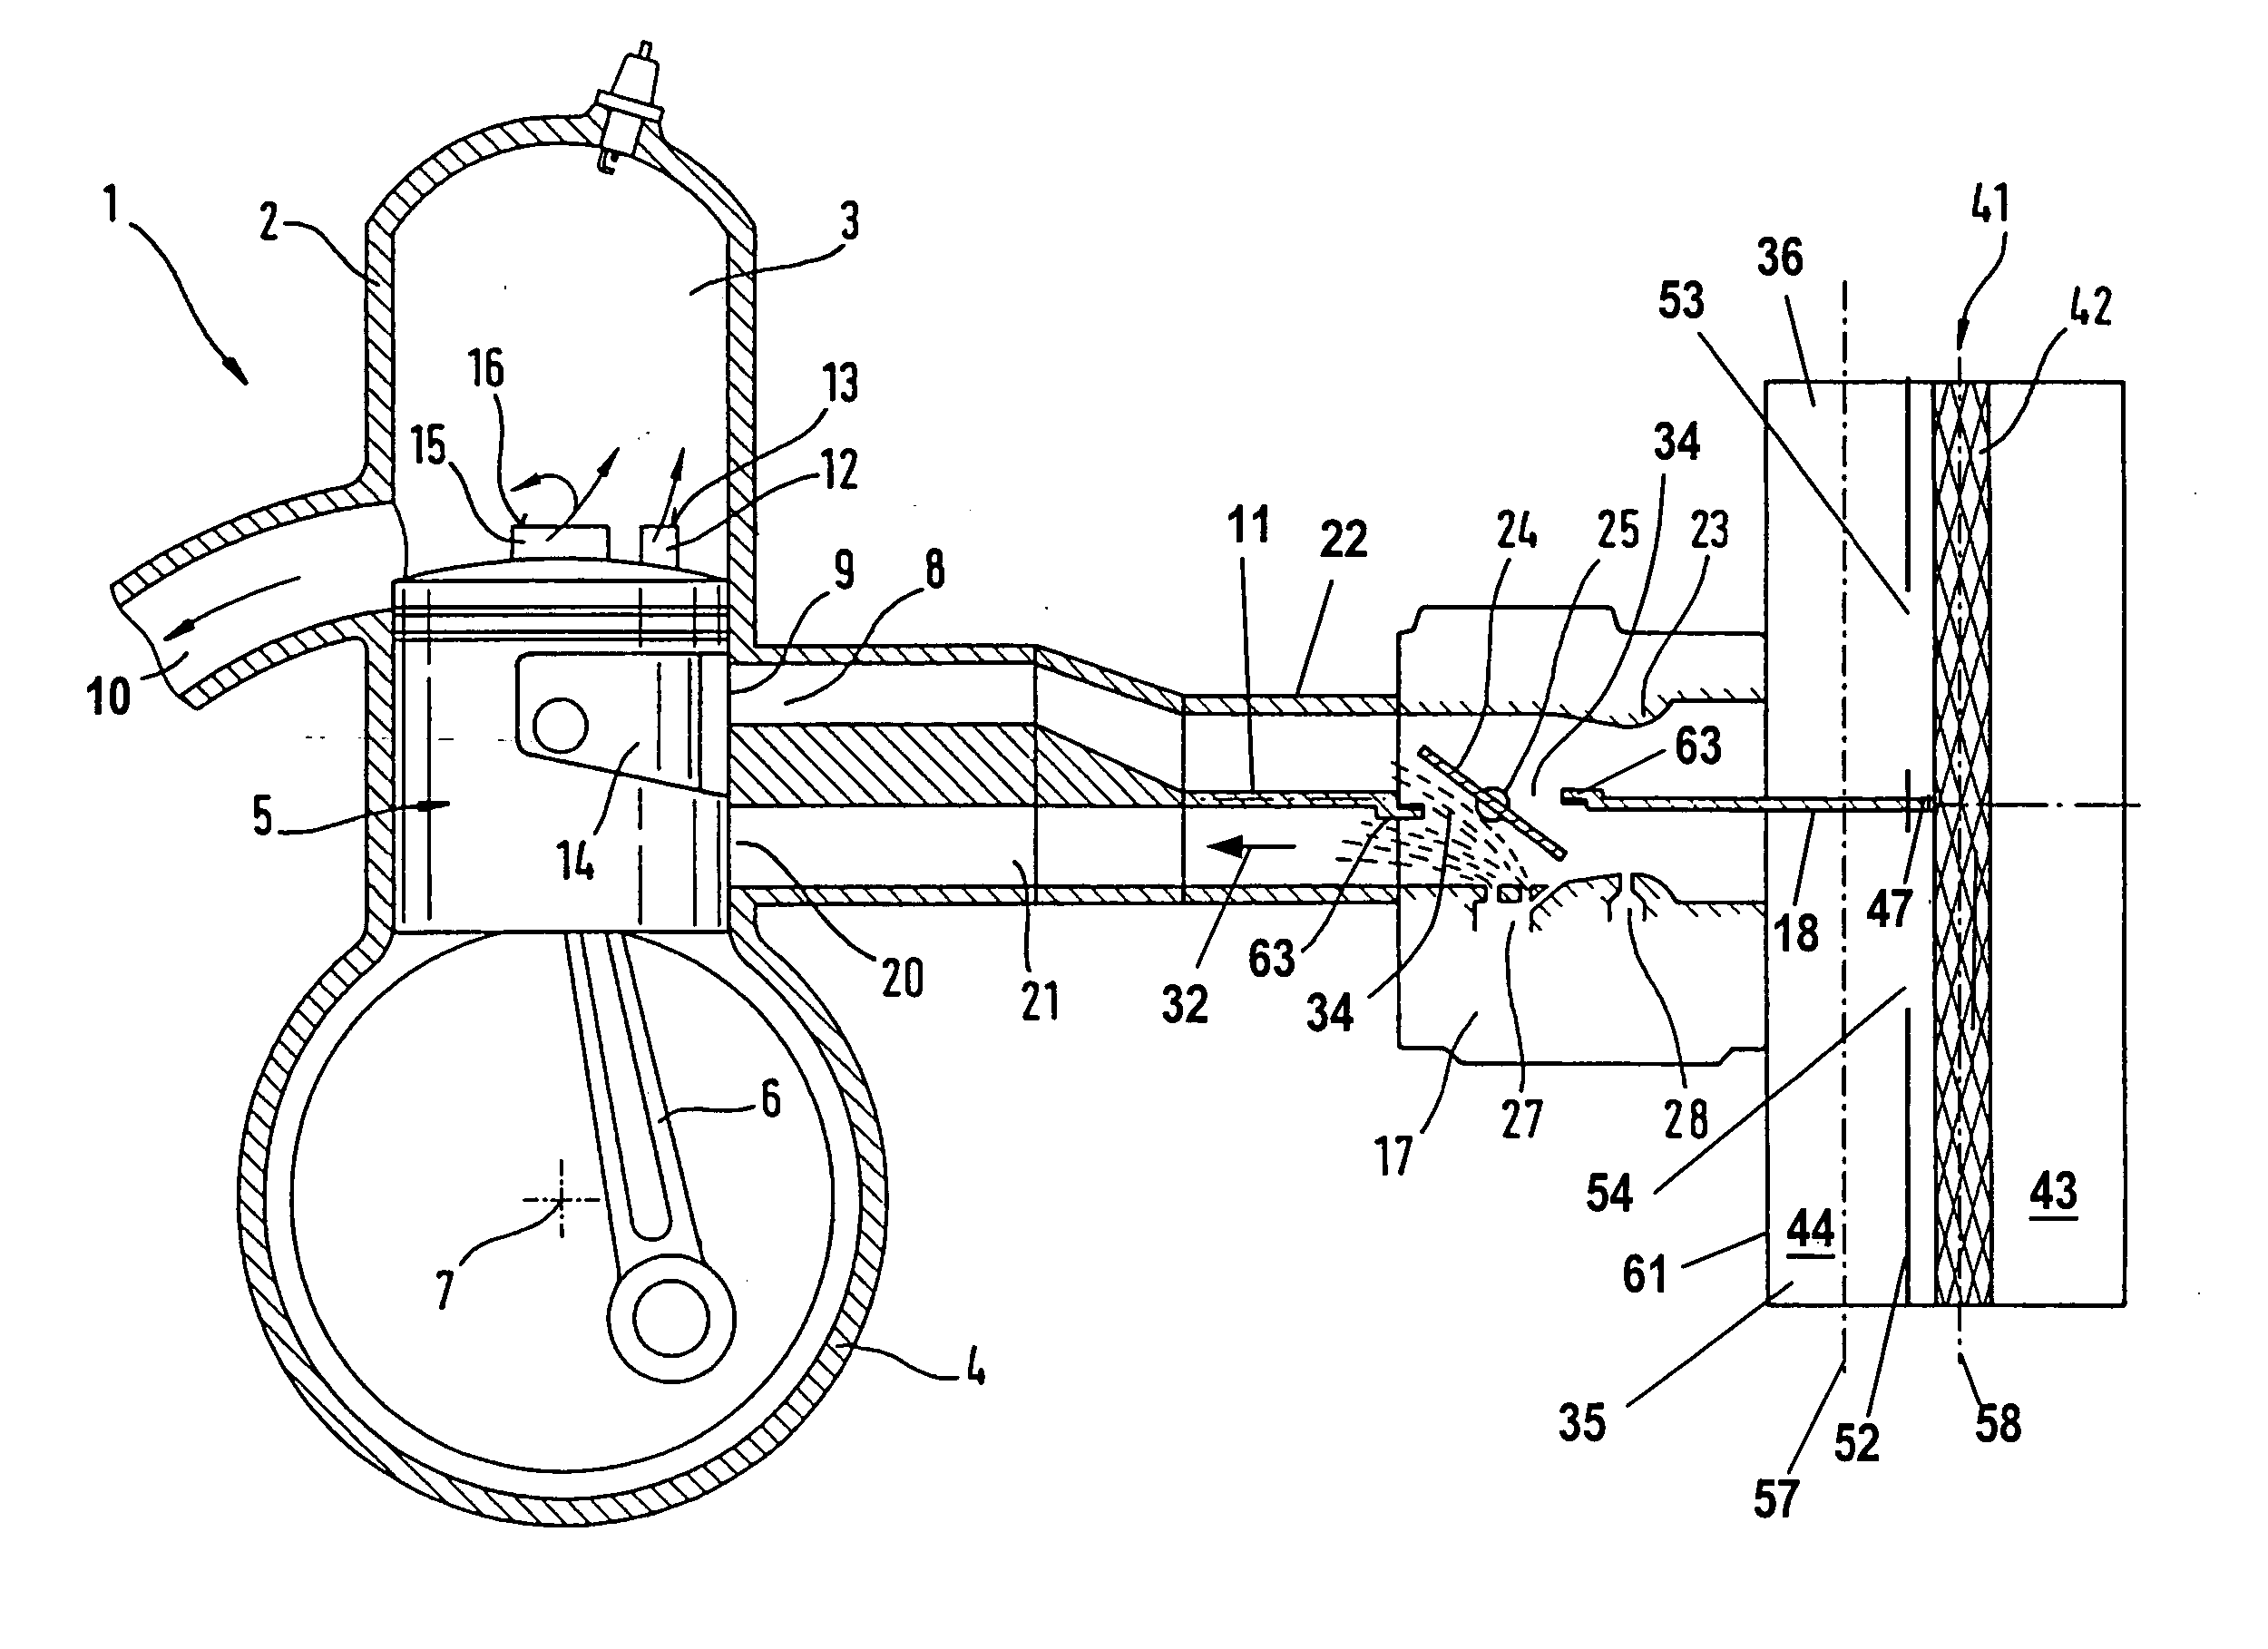 Two-stroke engine assembly